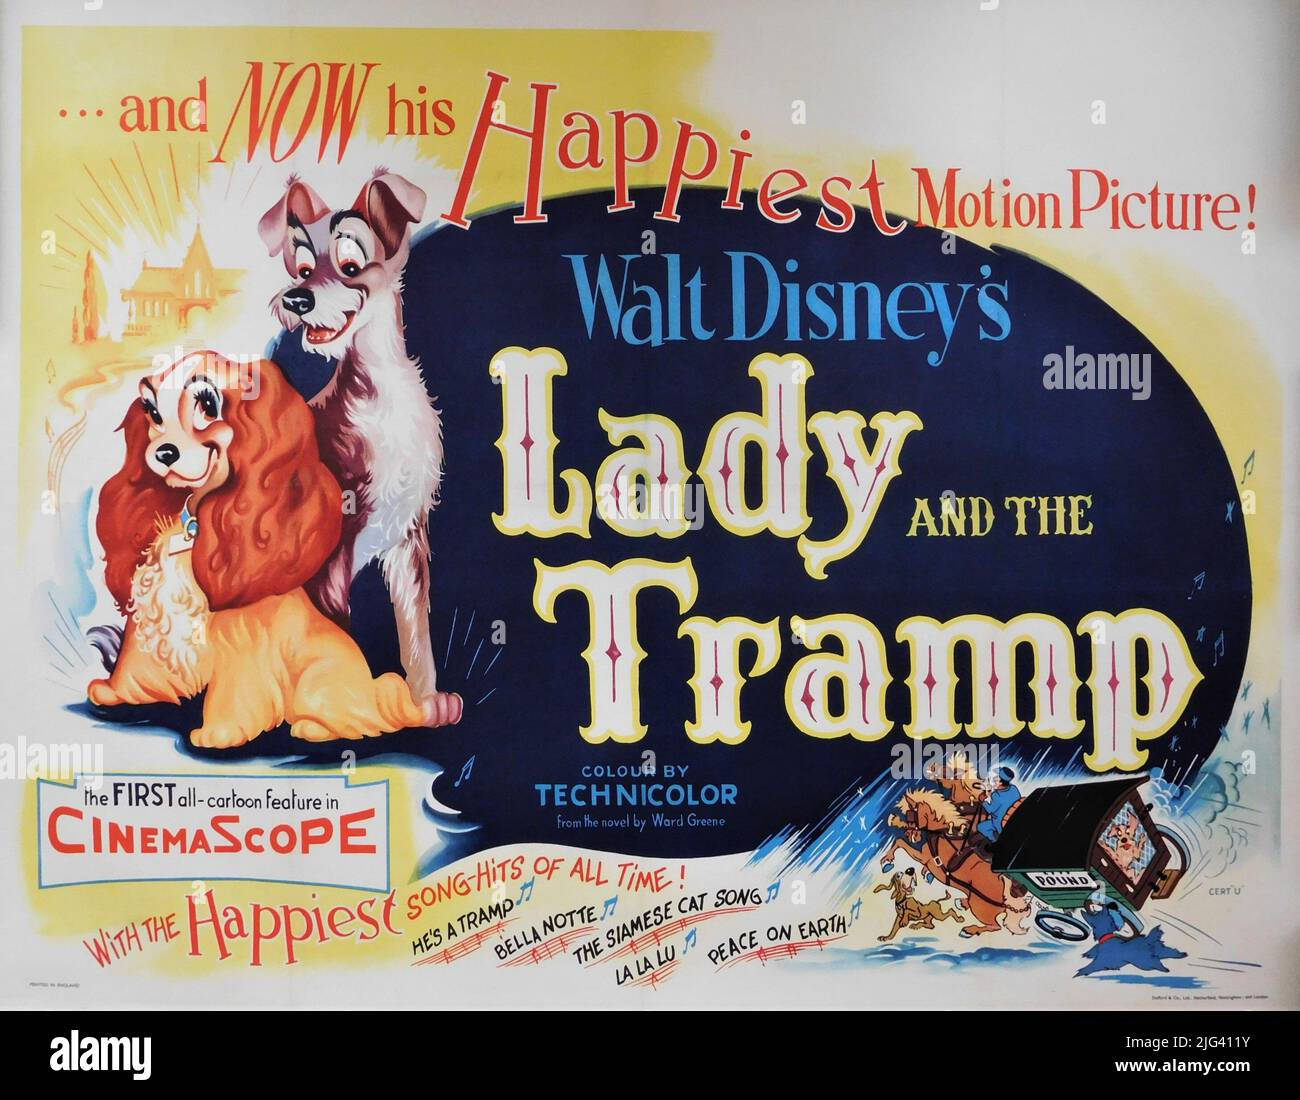 Original Release British Quad Poster for WALT DISNEY'S LADY AND THE TRAMP 1955 directors CLYDE GERONIMI WILFRED JACKSON and HAMILTON LUSKE from the story by Ward Greene Walt Disney Productions / Buena Vista Film Distribution Company Stock Photo